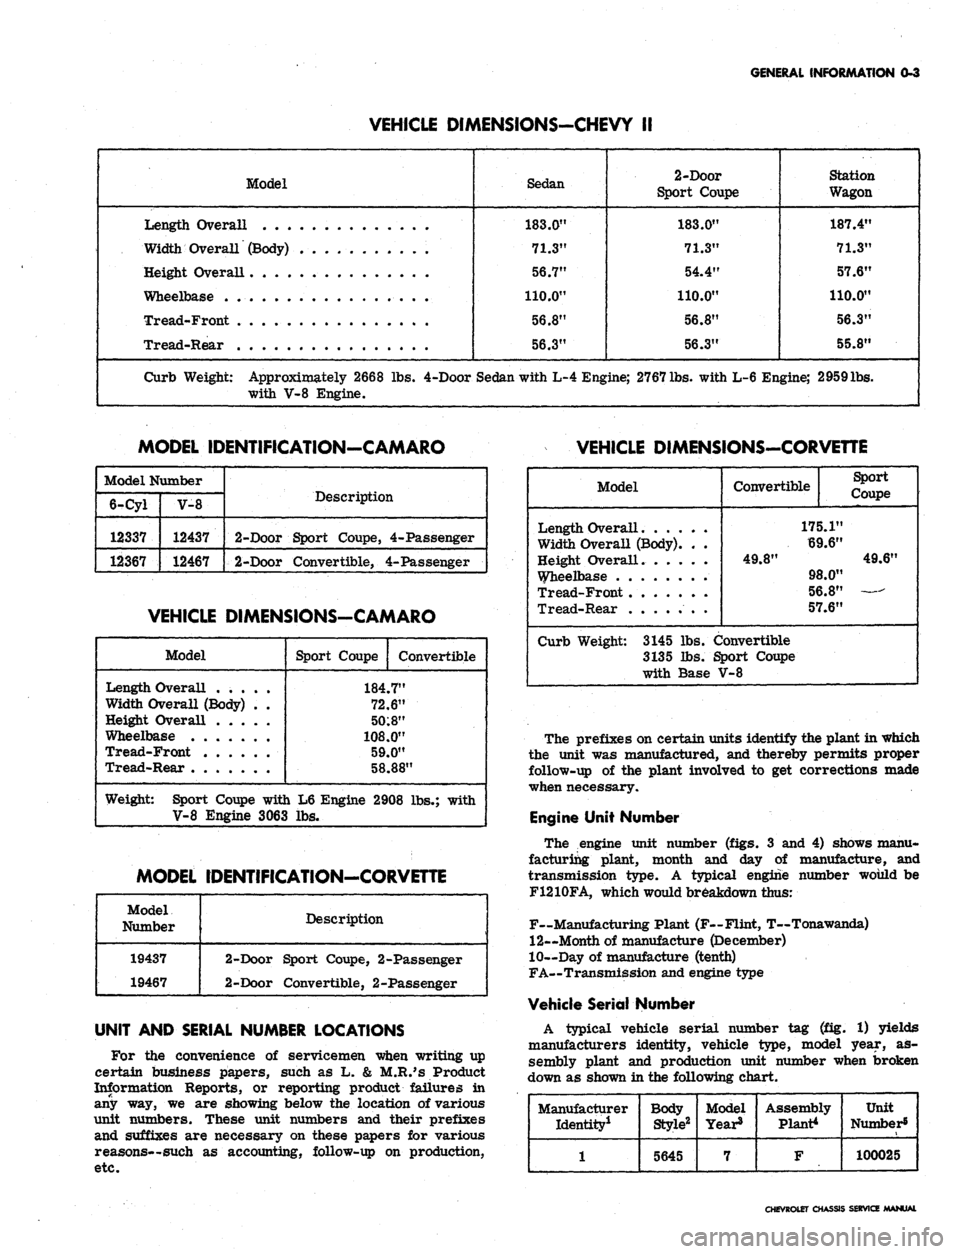 CHEVROLET CAMARO 1967 1.G Chassis Workshop Manual 
GENERAL INFORMATION 0-3

VEHICLE DIMENSIONS-CHEVY II

Model

Length Overall

Width Overall (Body) . . . .

Height Overall

Wheelbase

Tread-Front

Tread-Rear . . . 
Sedan

183.0"

71.3"

56.7"

110.0